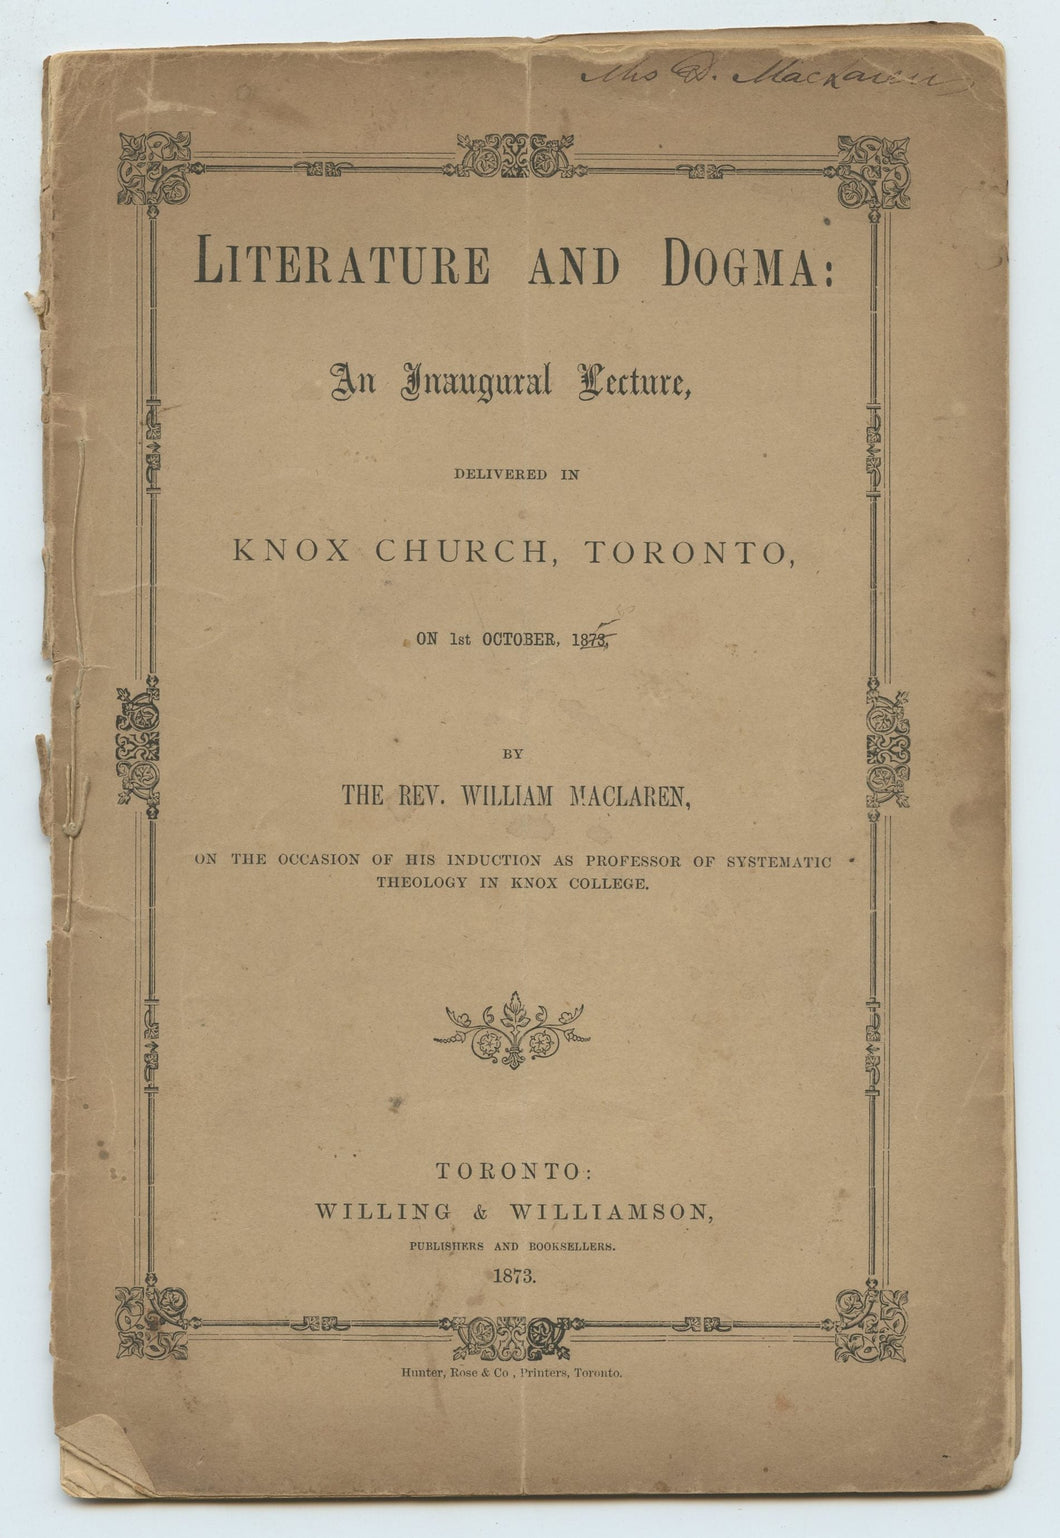 Literature and Dogma: An Inaugural Lecture, Delivered in Knox Church, Toronto, on 1st Octoer, 1873